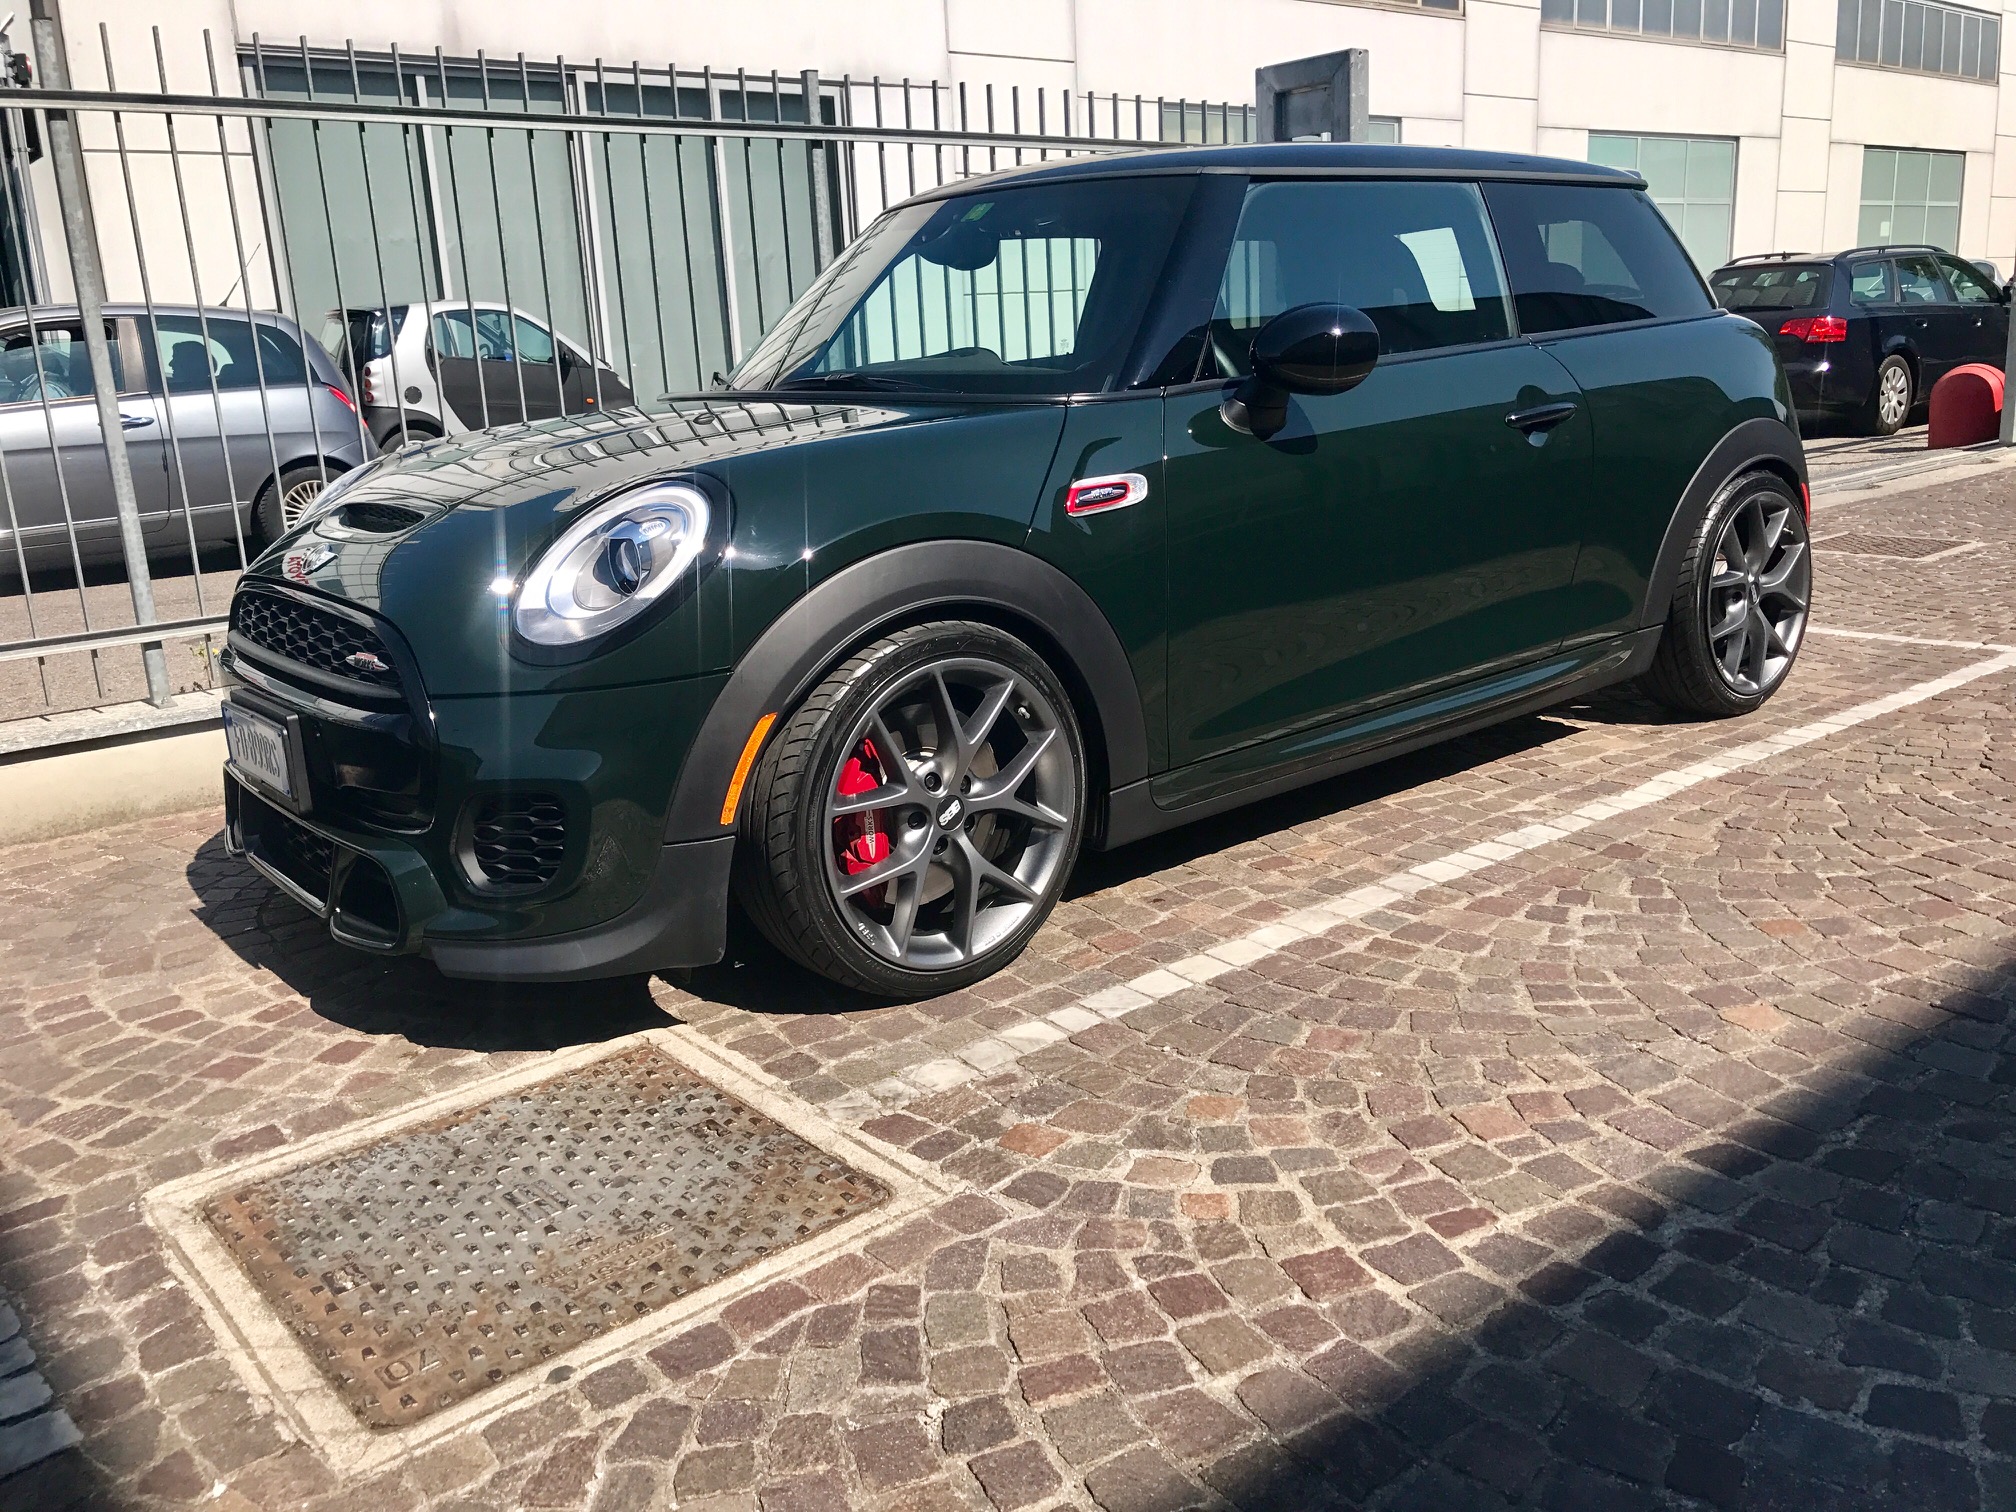 JCW JCW Aftermarket Wheels - Page 17 - North American Motoring